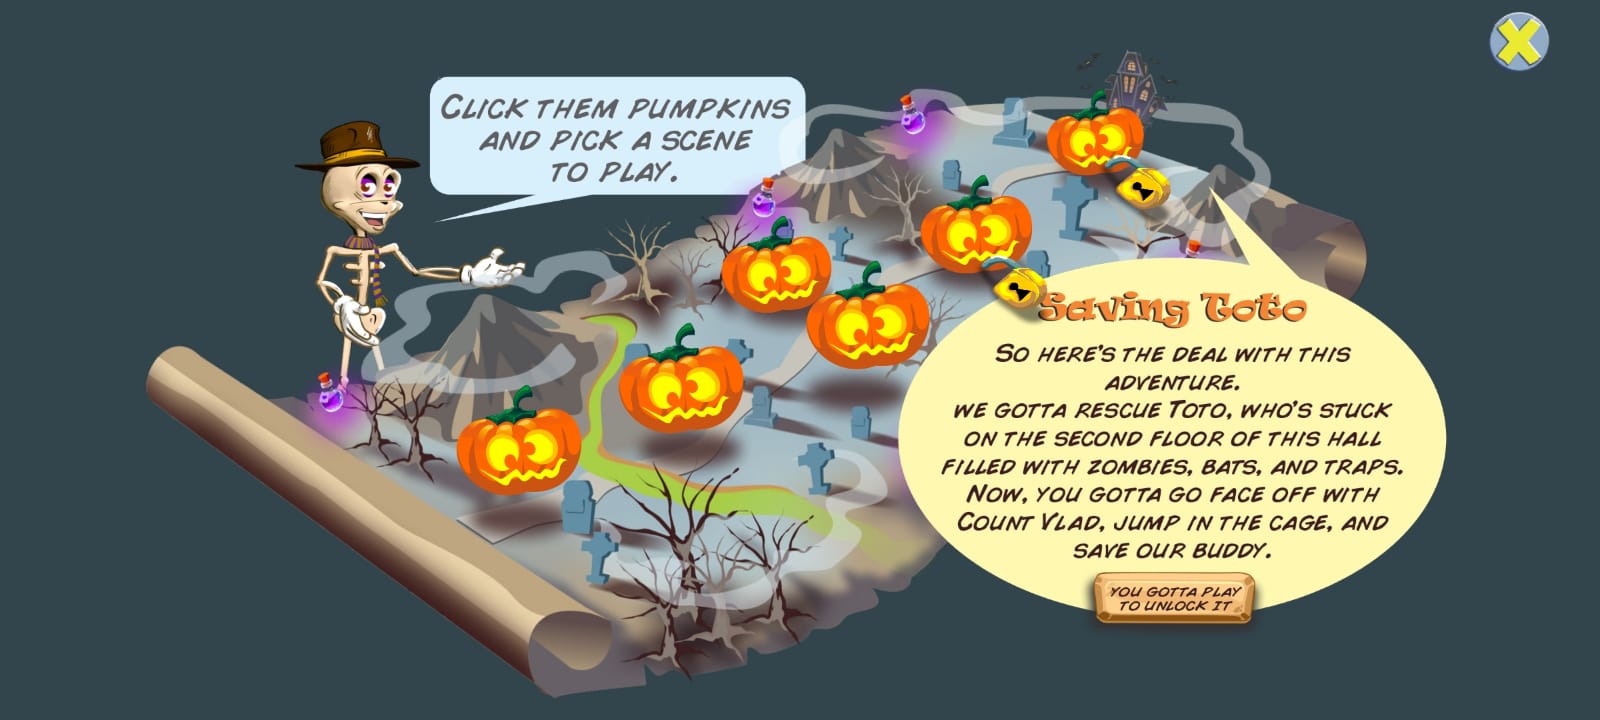 Download Pumpkins Quest Android free game.